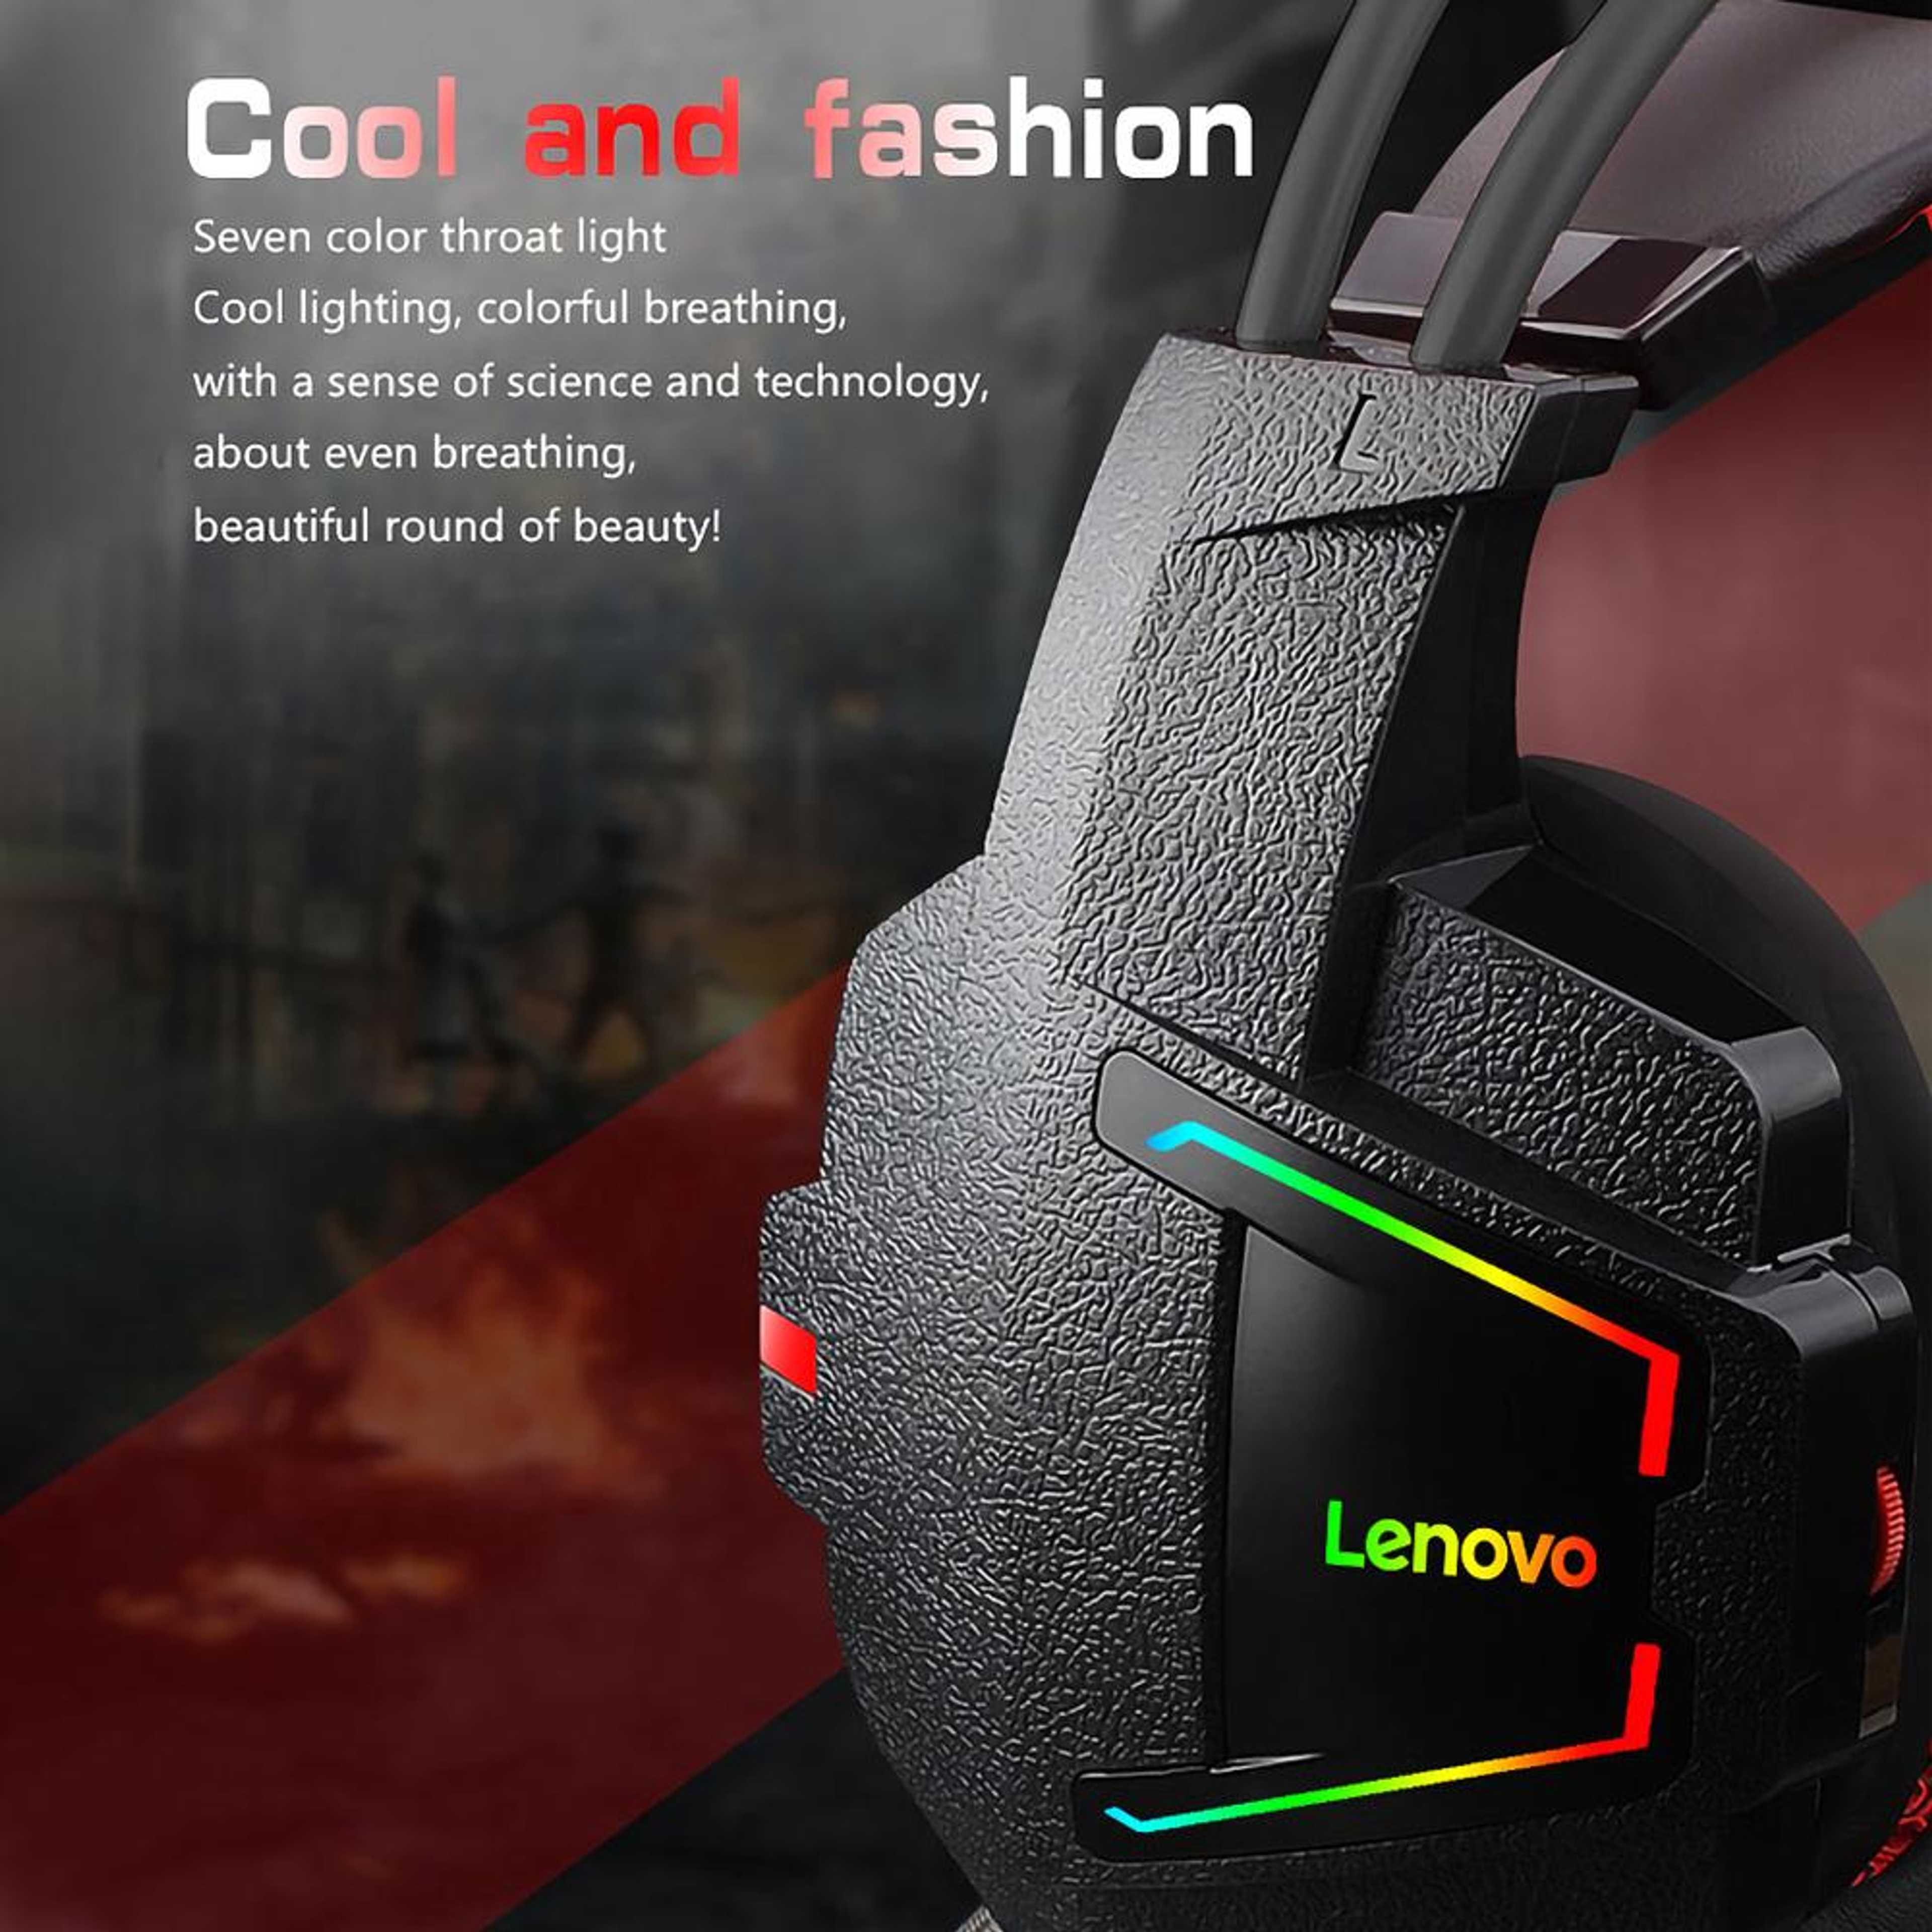 Original Lenovo HU85 Gaming Headset USB Port - Adjustment With Hose Long Mic - Lenovo HU85 RGB Gaming Headphones with Microphone - Wire Connects Through USB Port -Soft Earpads & Stereo Bass Surround Sound - RGB Led Light - Lightweight Noise Canceling